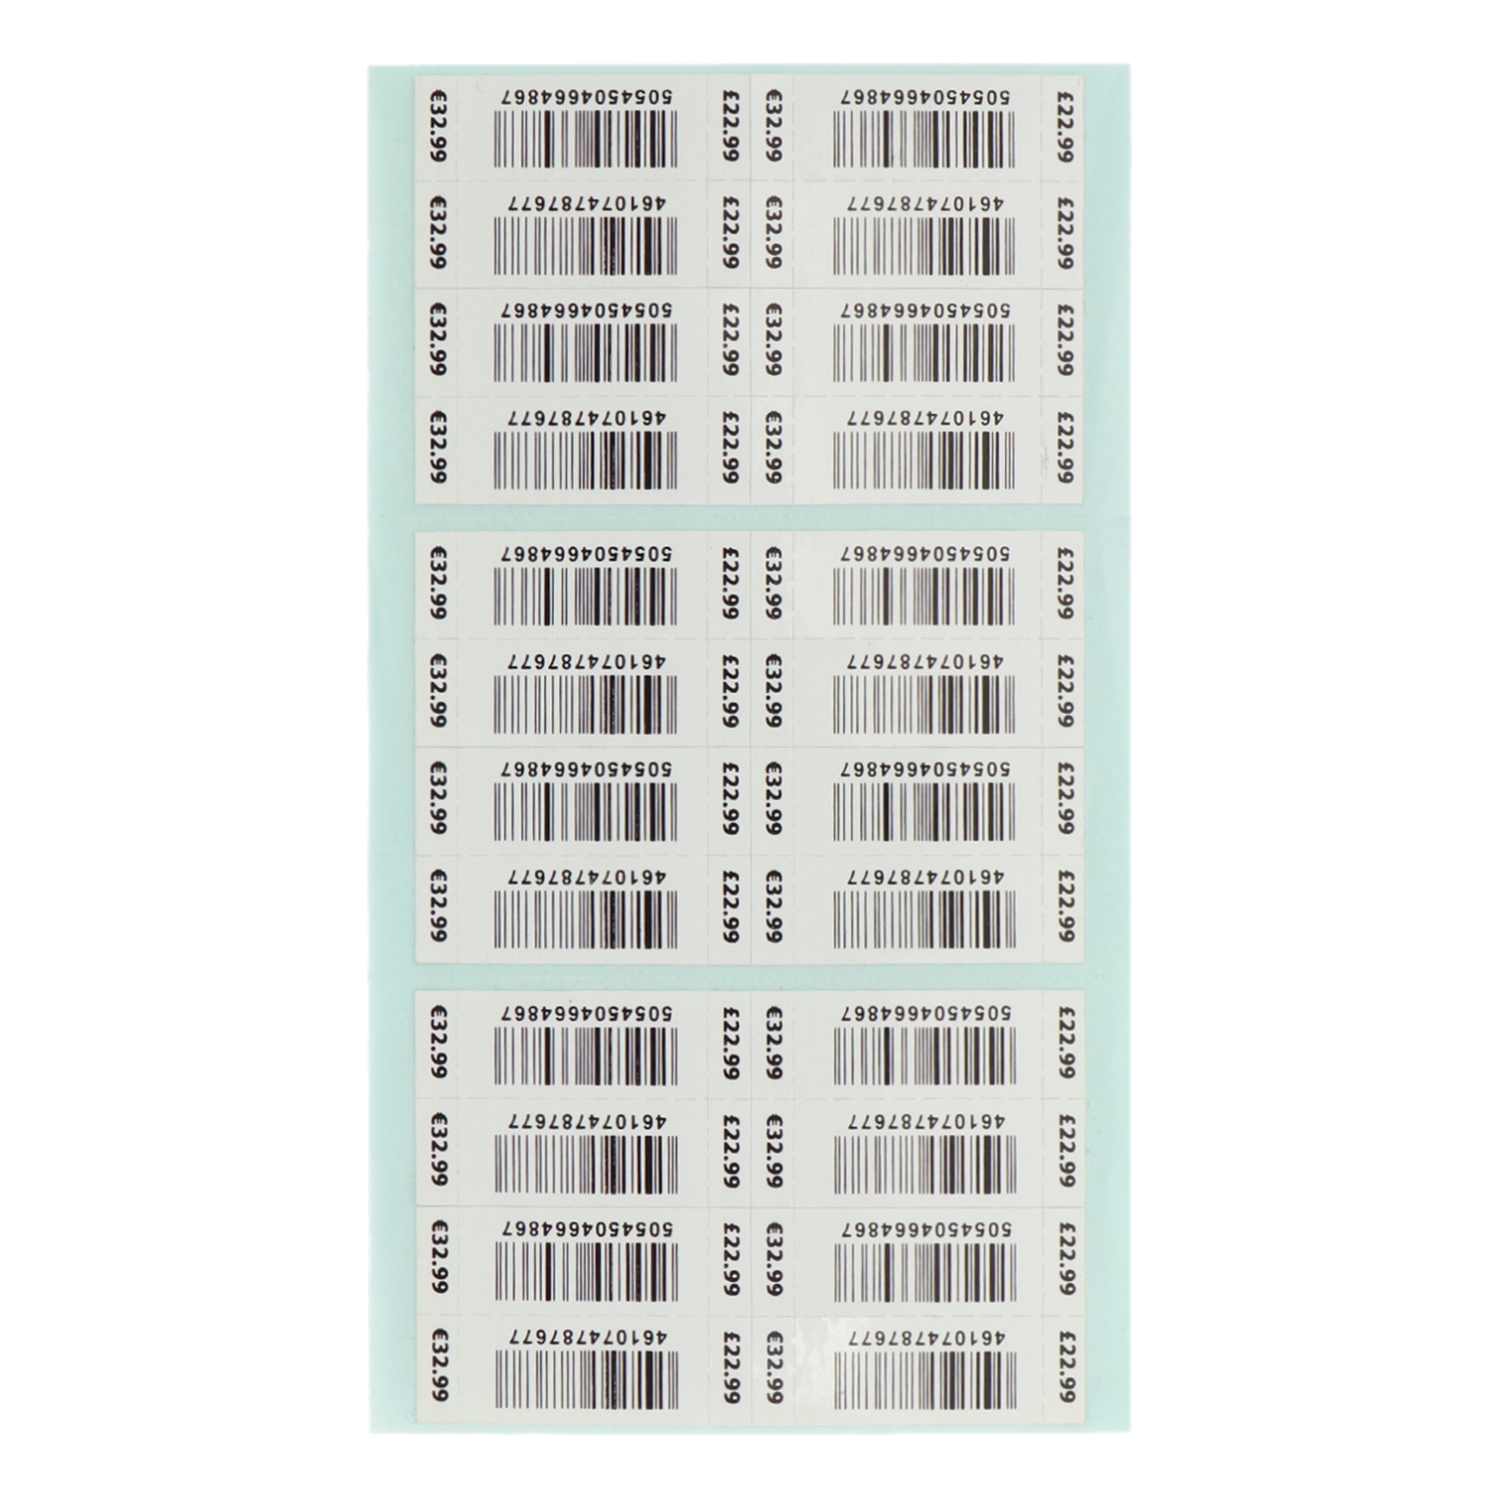 Barcode Label with Random Variable Data Number